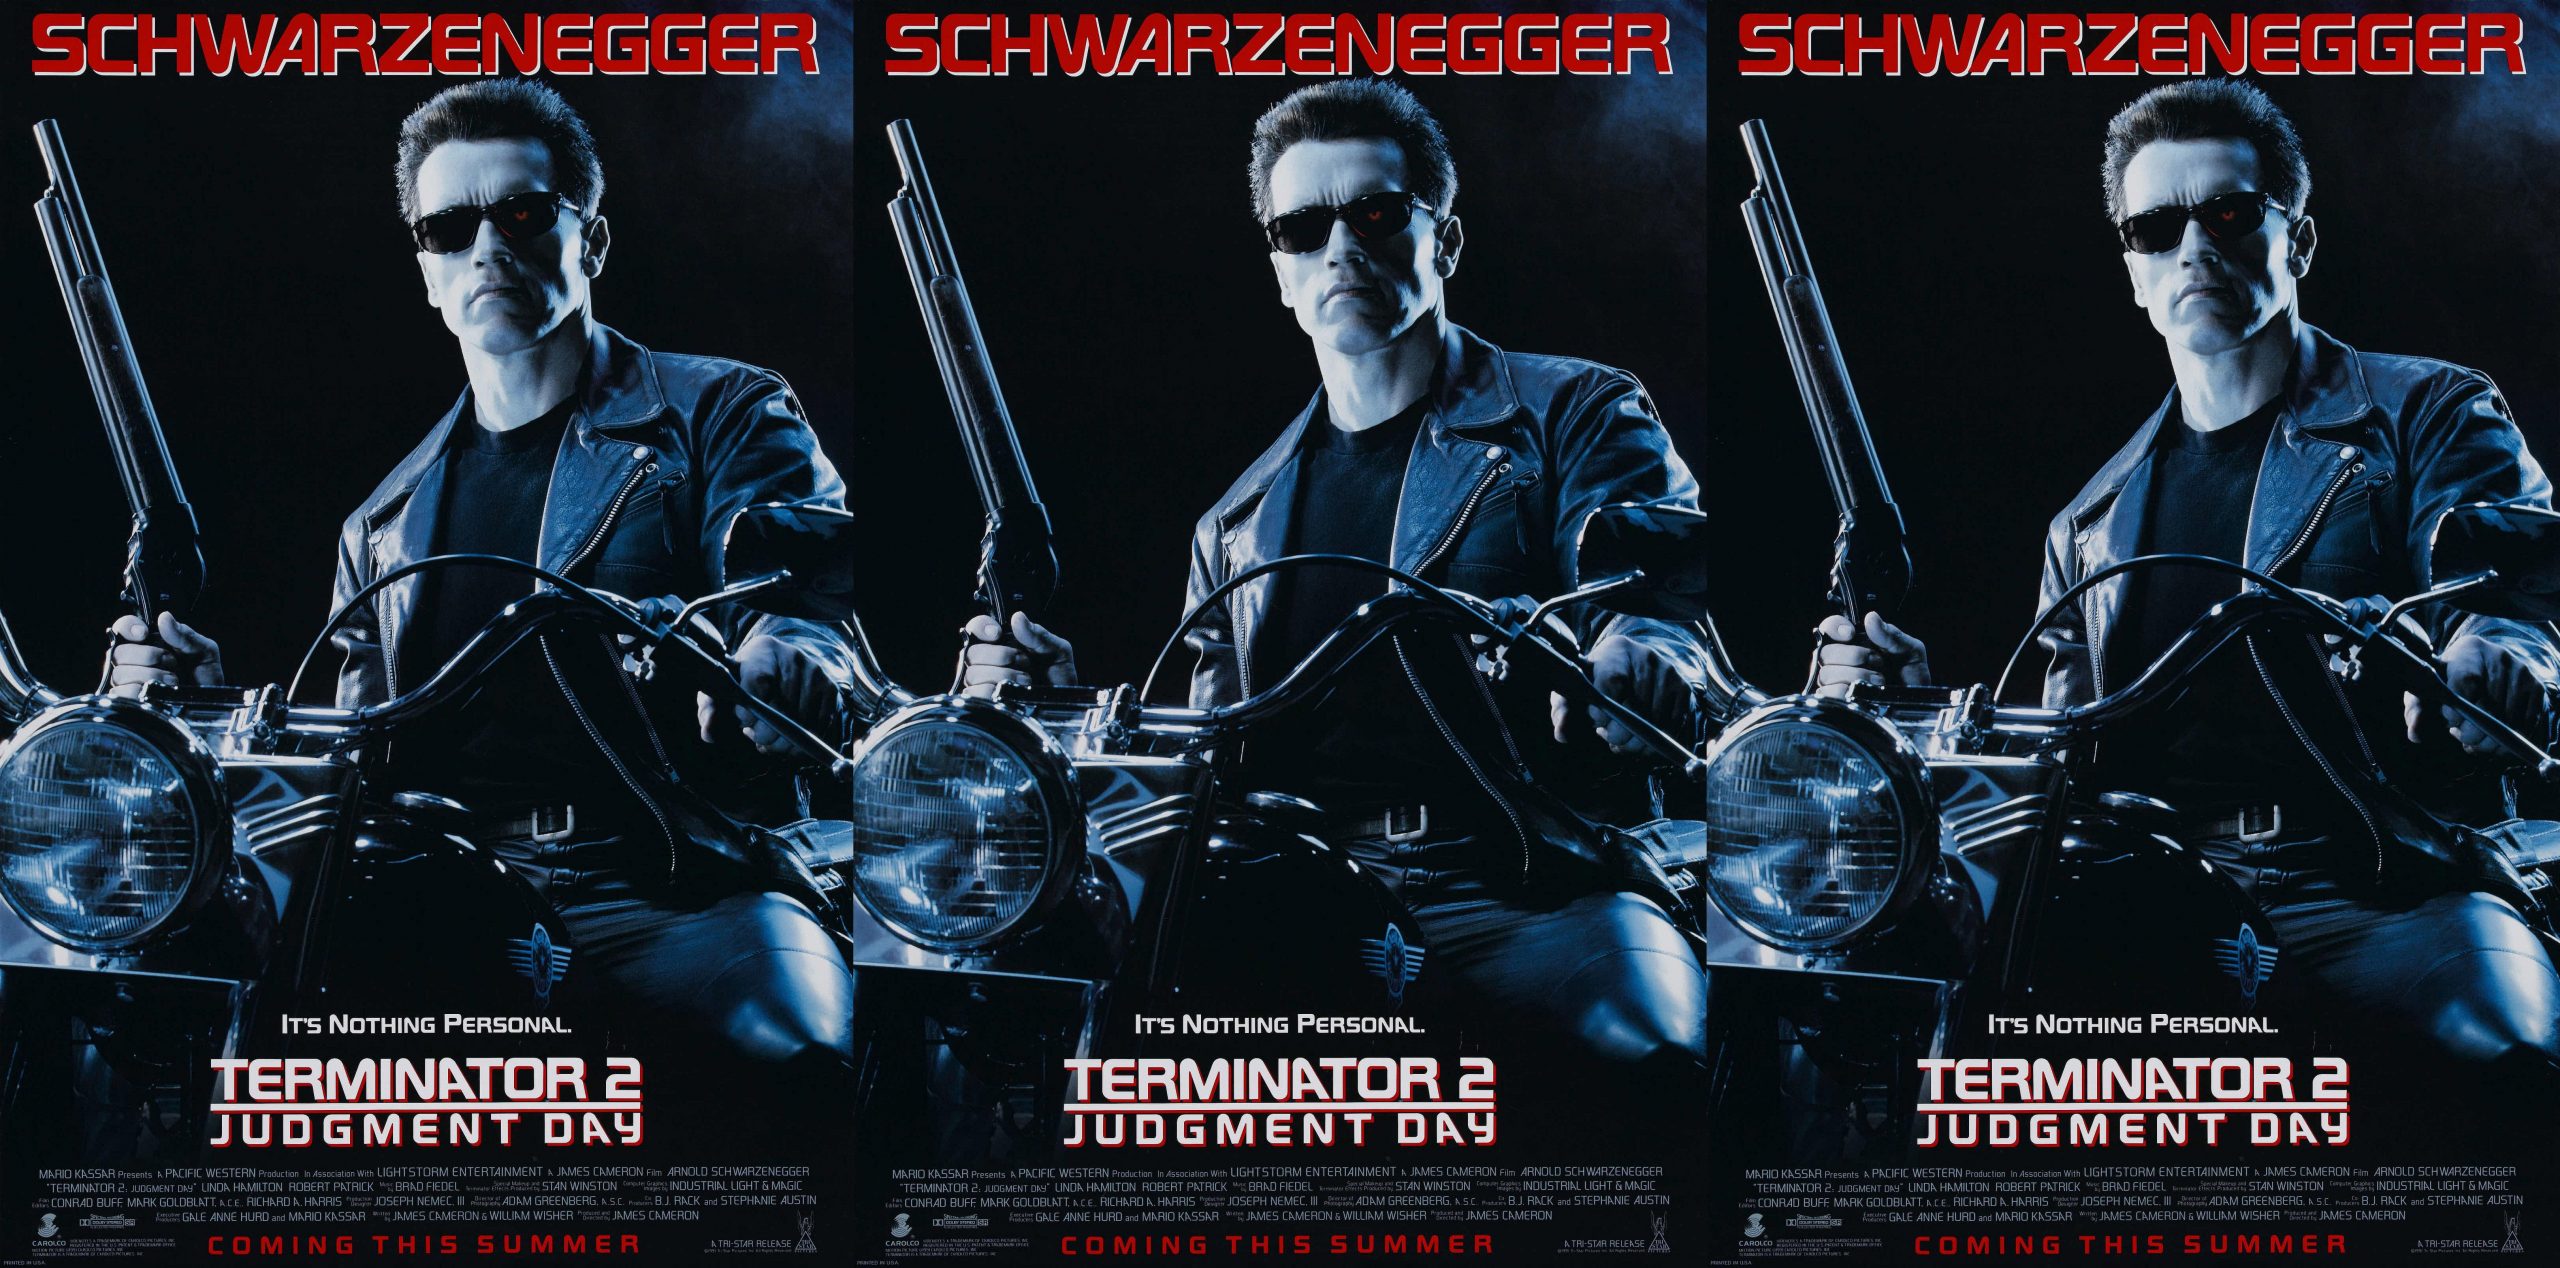 Terminator 2: Judgment Day, Carolco Pictures, Pacific Western, Lightstorm Entertainment, Le Studio Canal+, T2 Productions